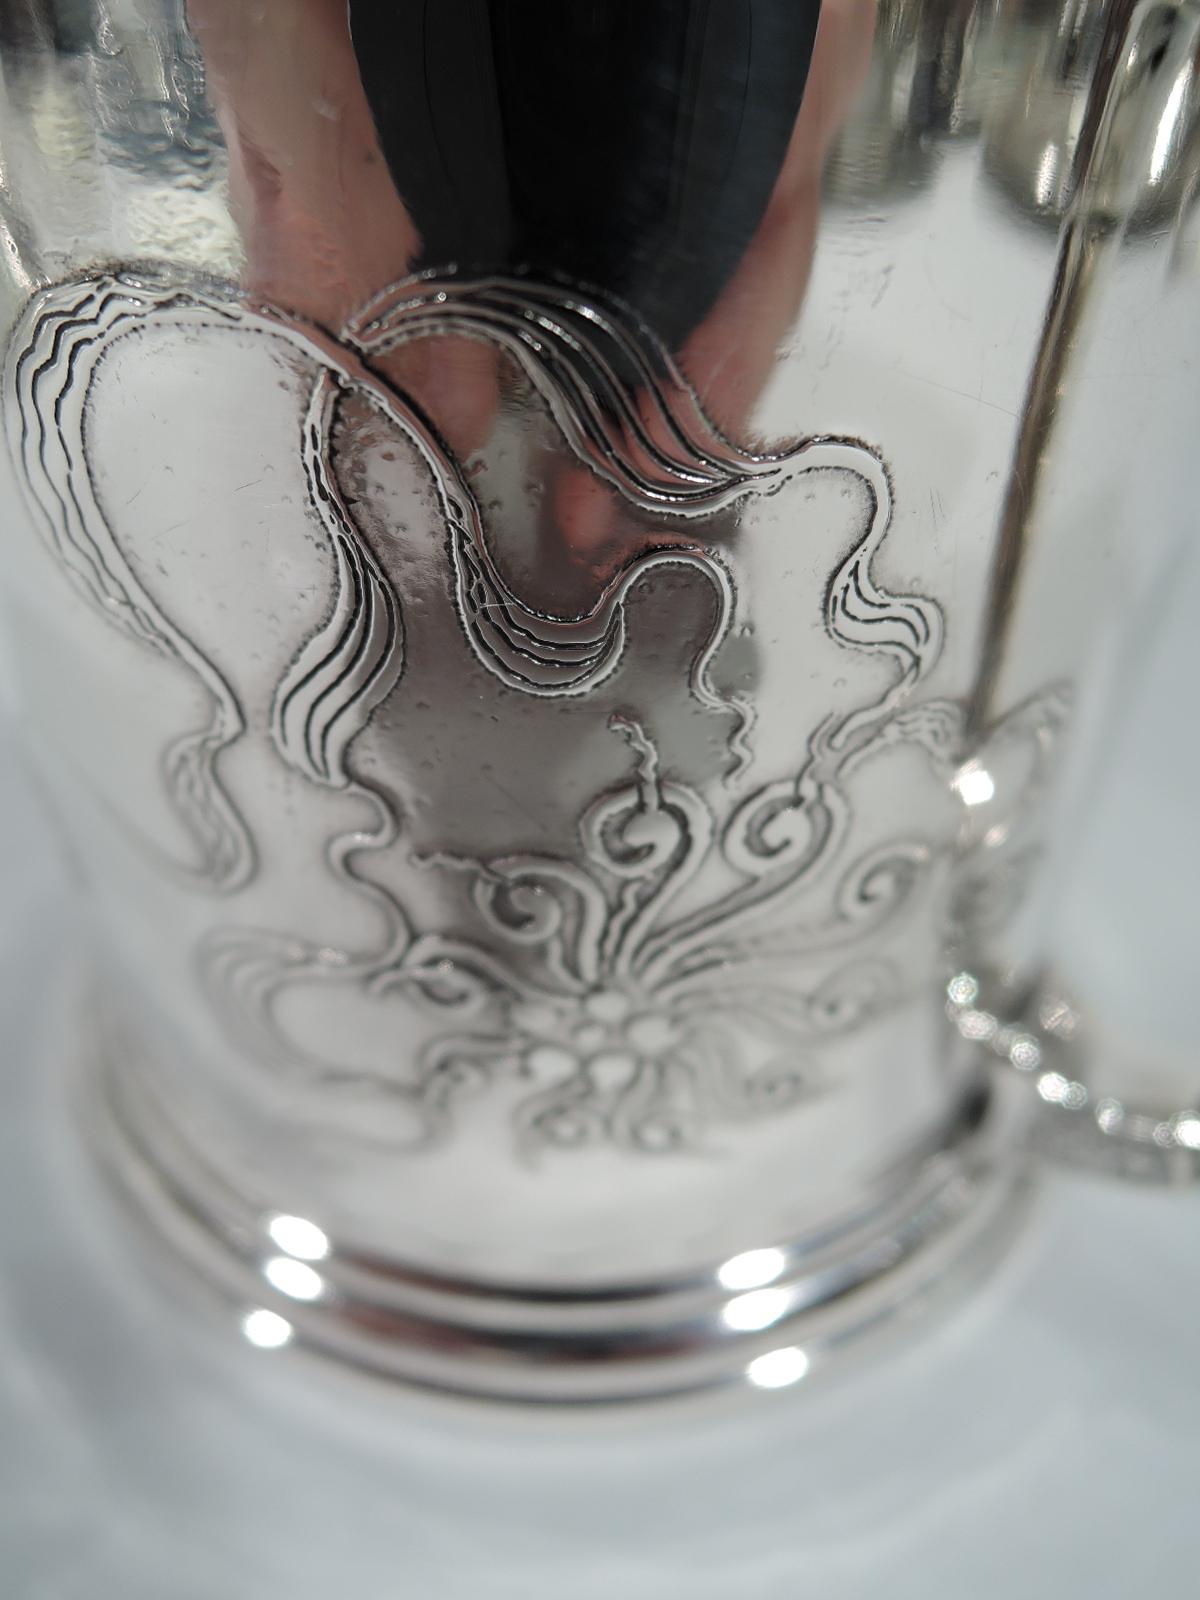 19th Century Stylistically Advanced Art Nouveau Sterling Silver Baby Cup by Whiting